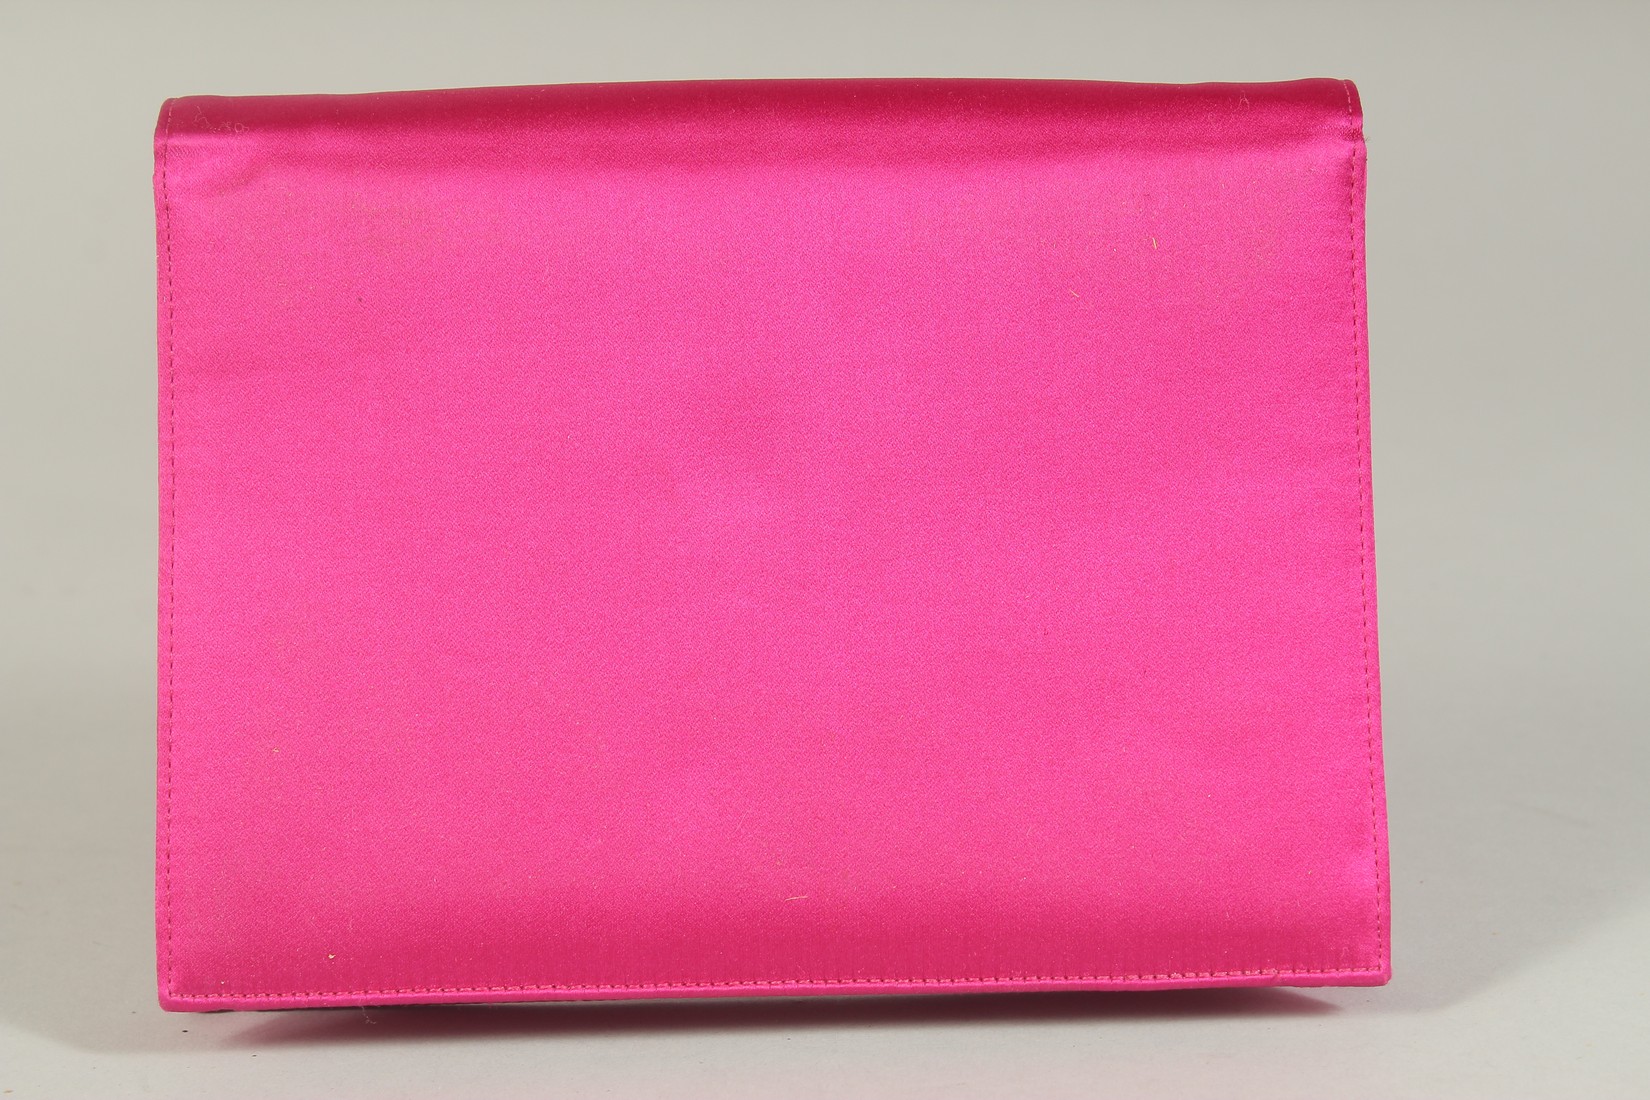 A RAYNE, BY APPOINTMENT TO HER MAJESTY THE QUEEN, PINK FABRIC EVENING BAG, 6.5ins long. - Image 2 of 4